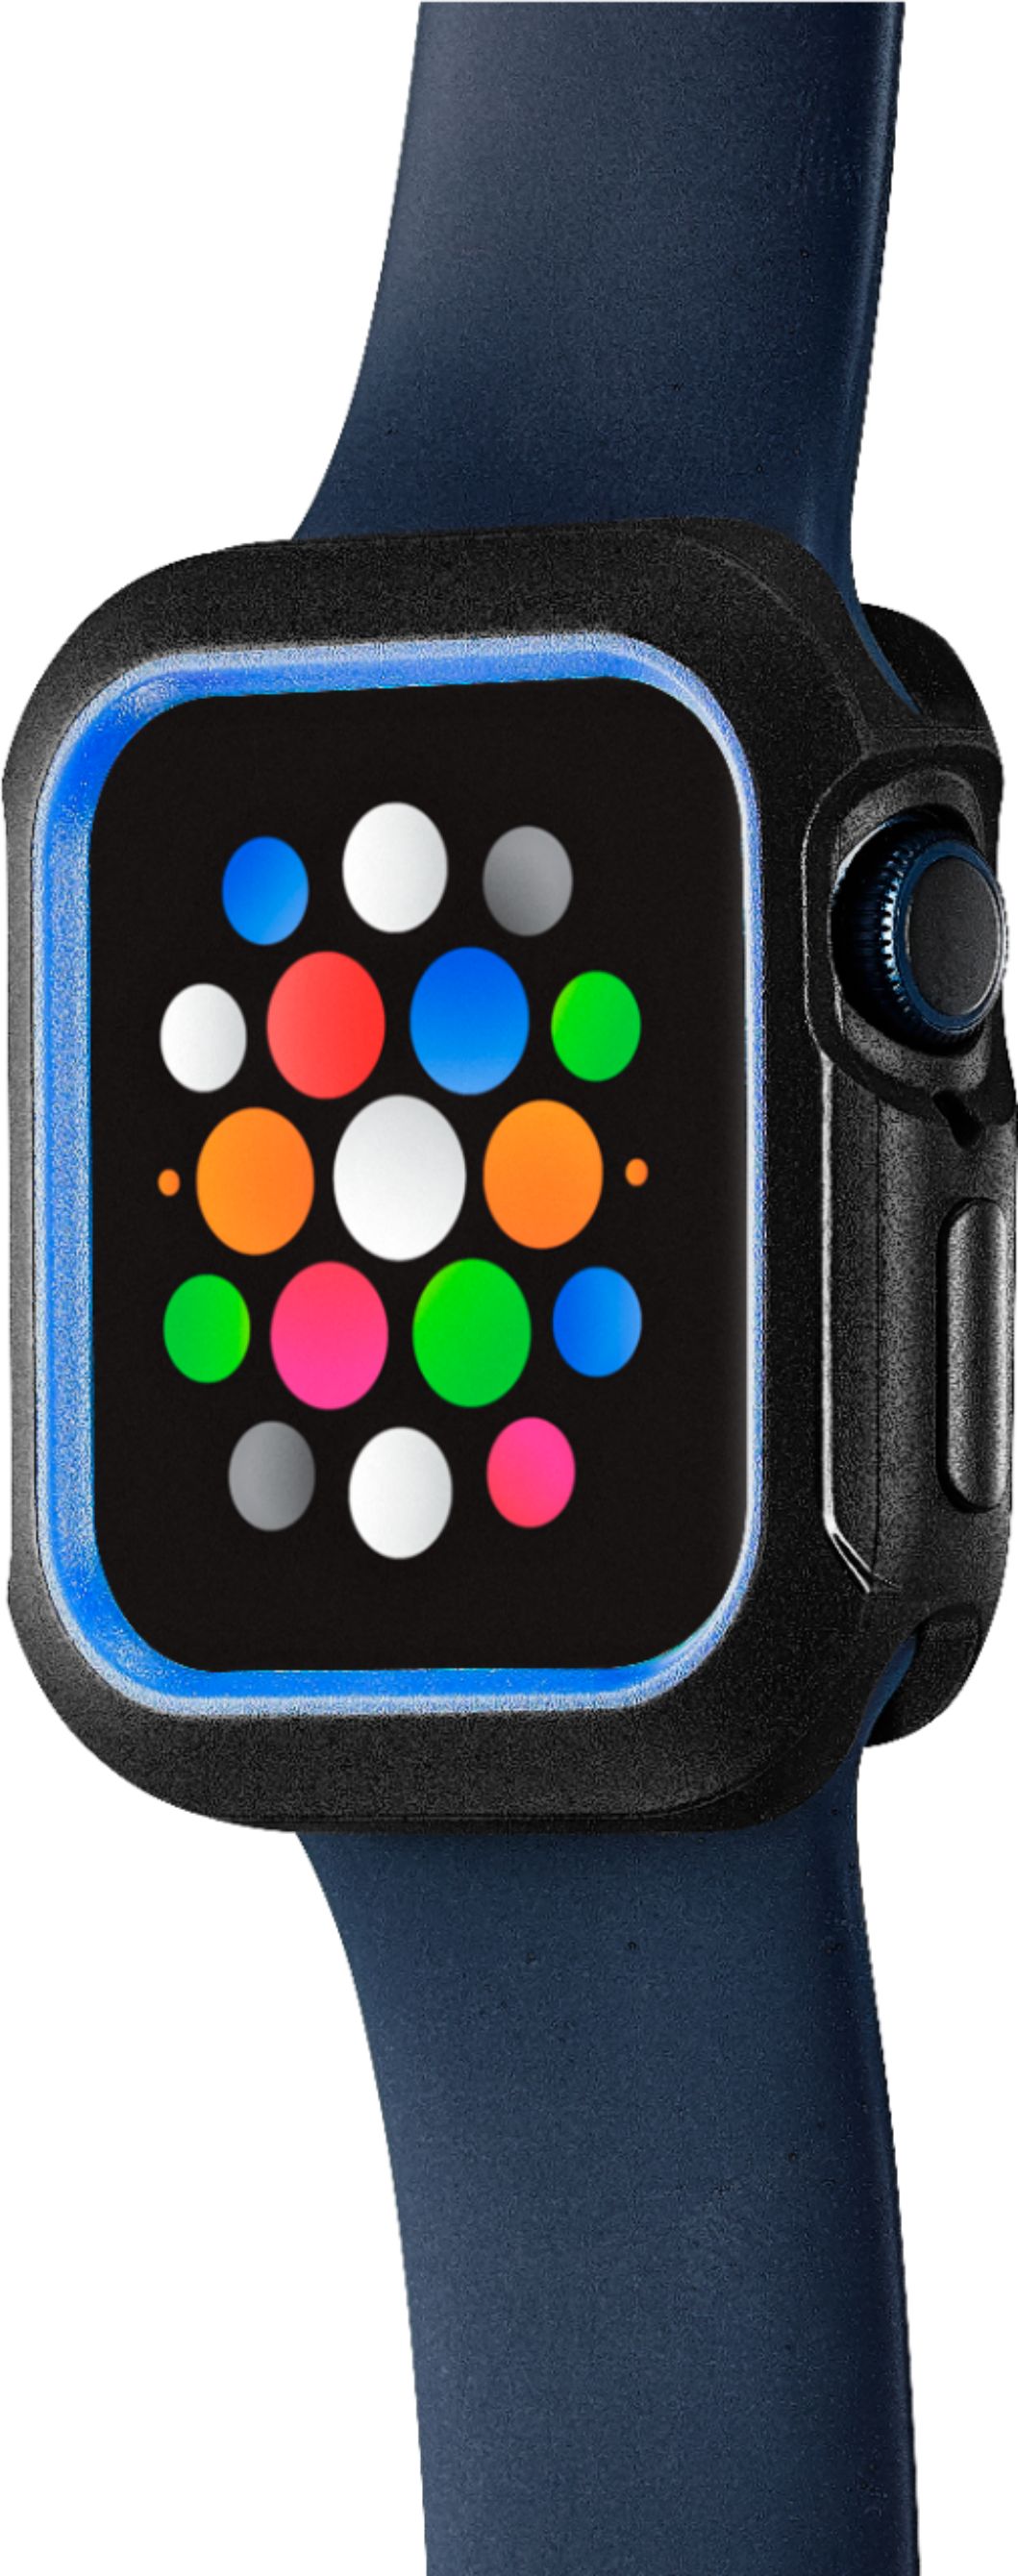 Left View: UltraLast - Lithium-Polymer Battery for Apple Watch 1 42mm